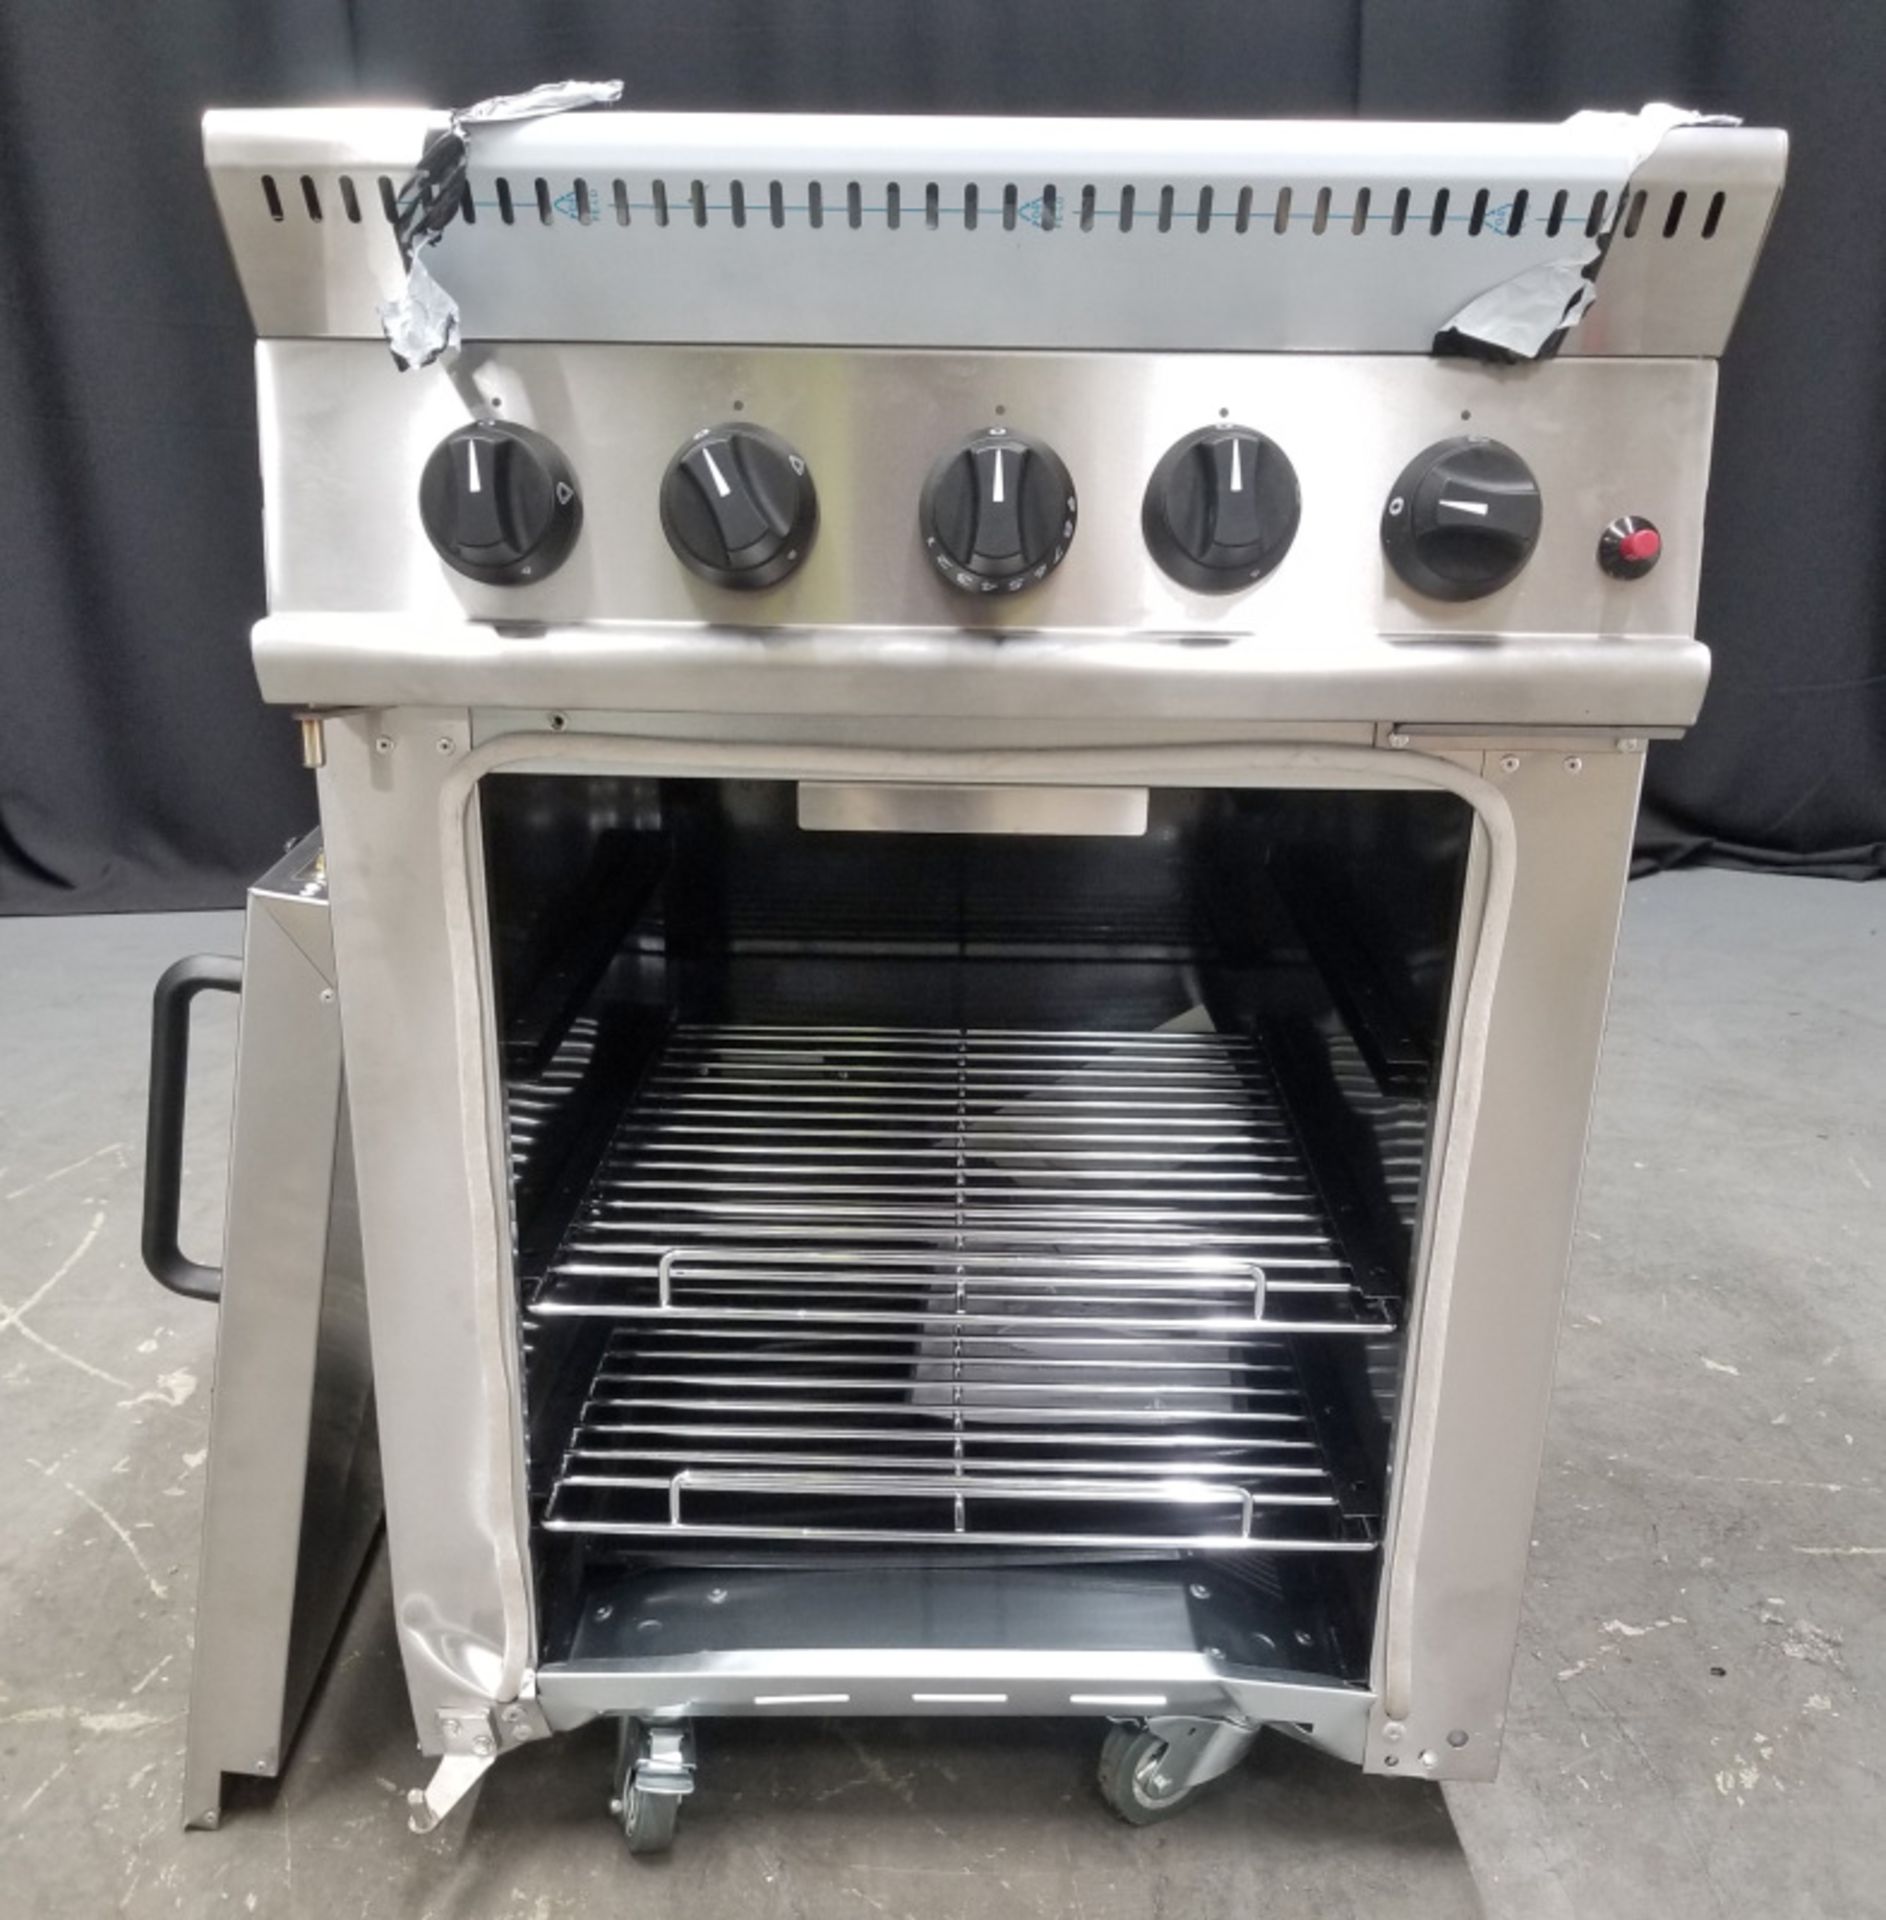 Parry 4 Burner Gas Oven - Model GB4 Serial No.060160104 - L610 xW770 x H850mm - PLEASE SEE